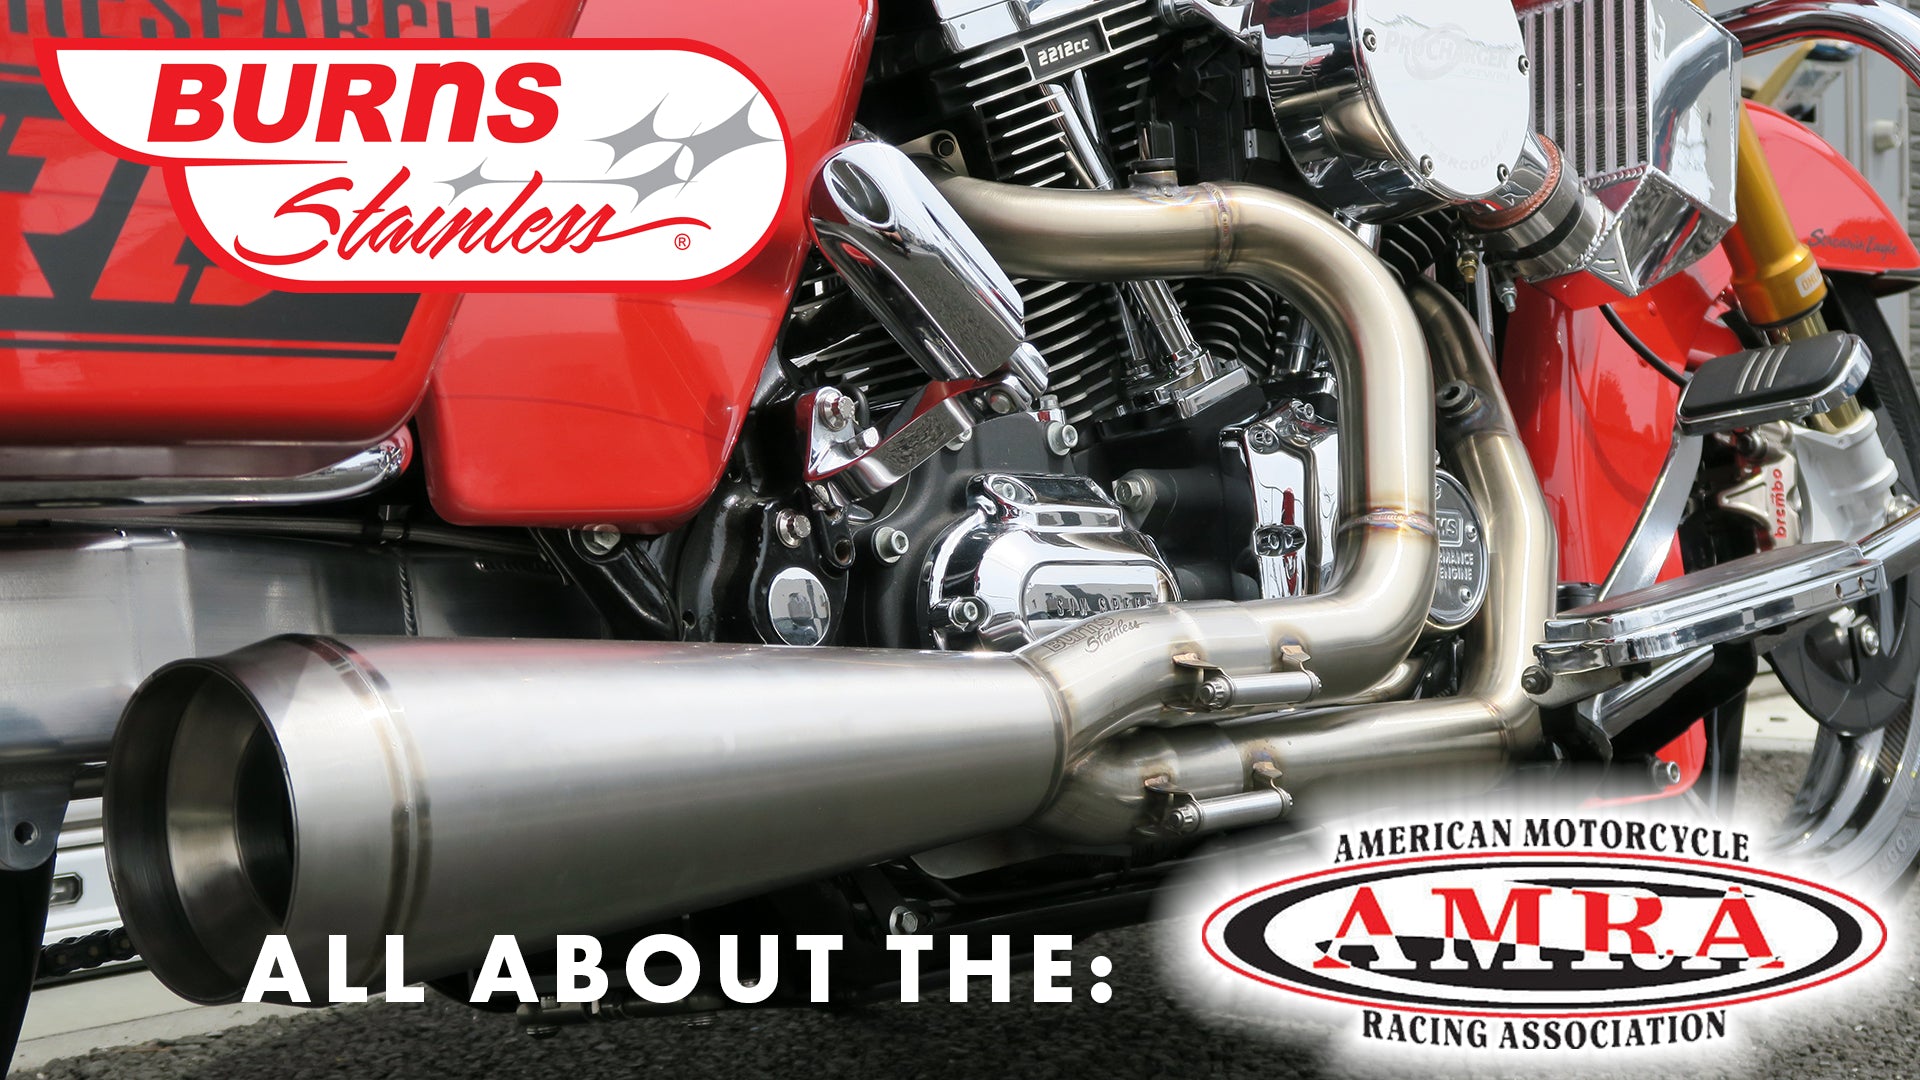 Ready to Race with the American Motorcycle Racing Association?